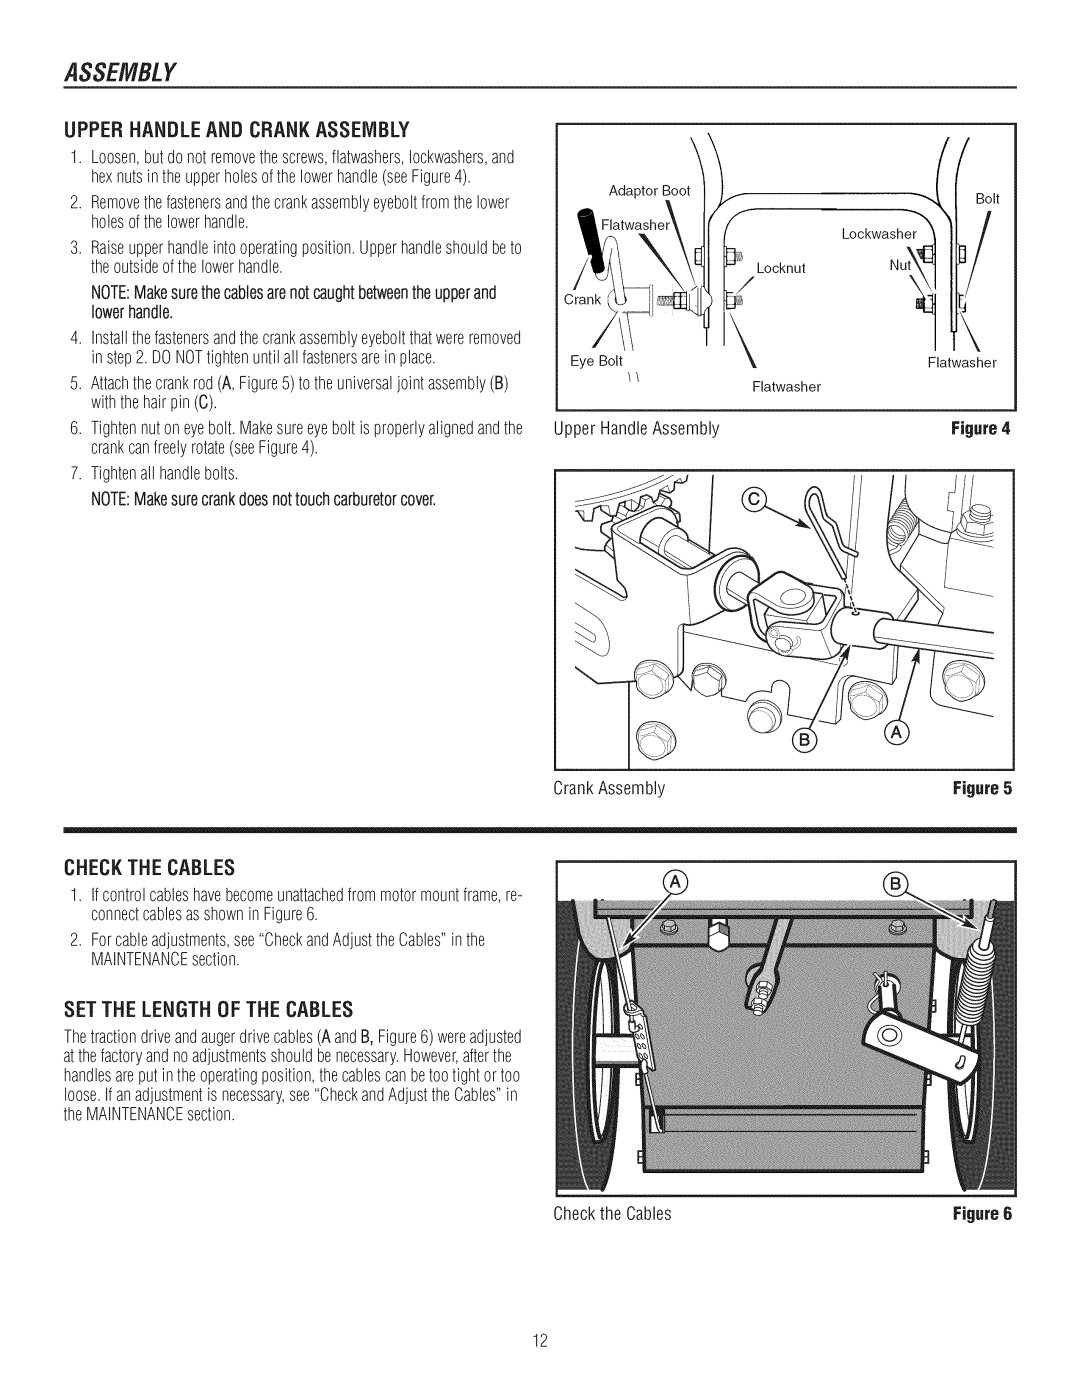 Craftsman C950-52943-0 owner manual Assembly, Upperhandleand Crankassembly, Set The Length Of The Cables 